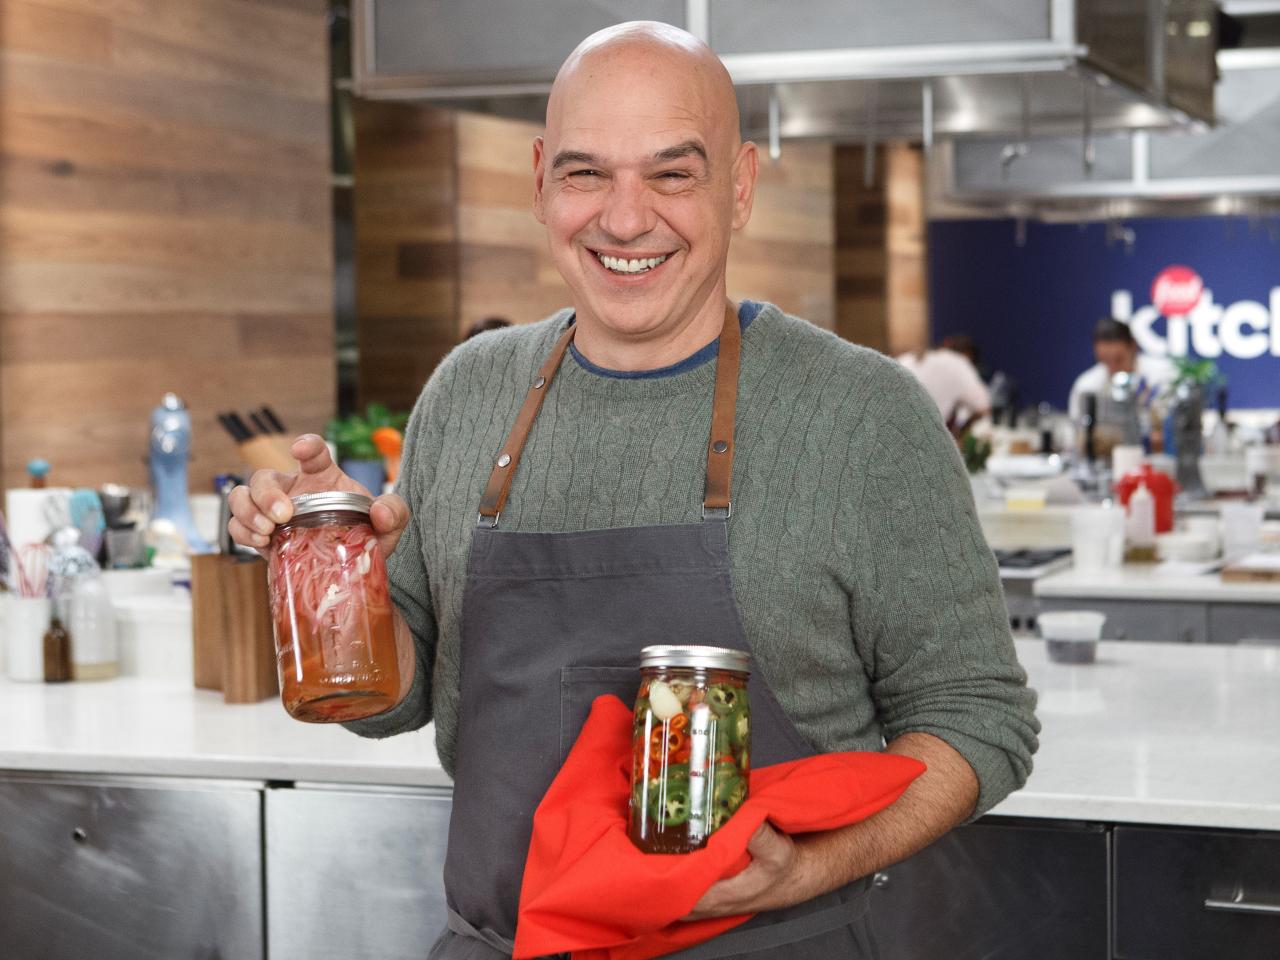 Michael Symon Live to Cook French Fry Cutter by Weston